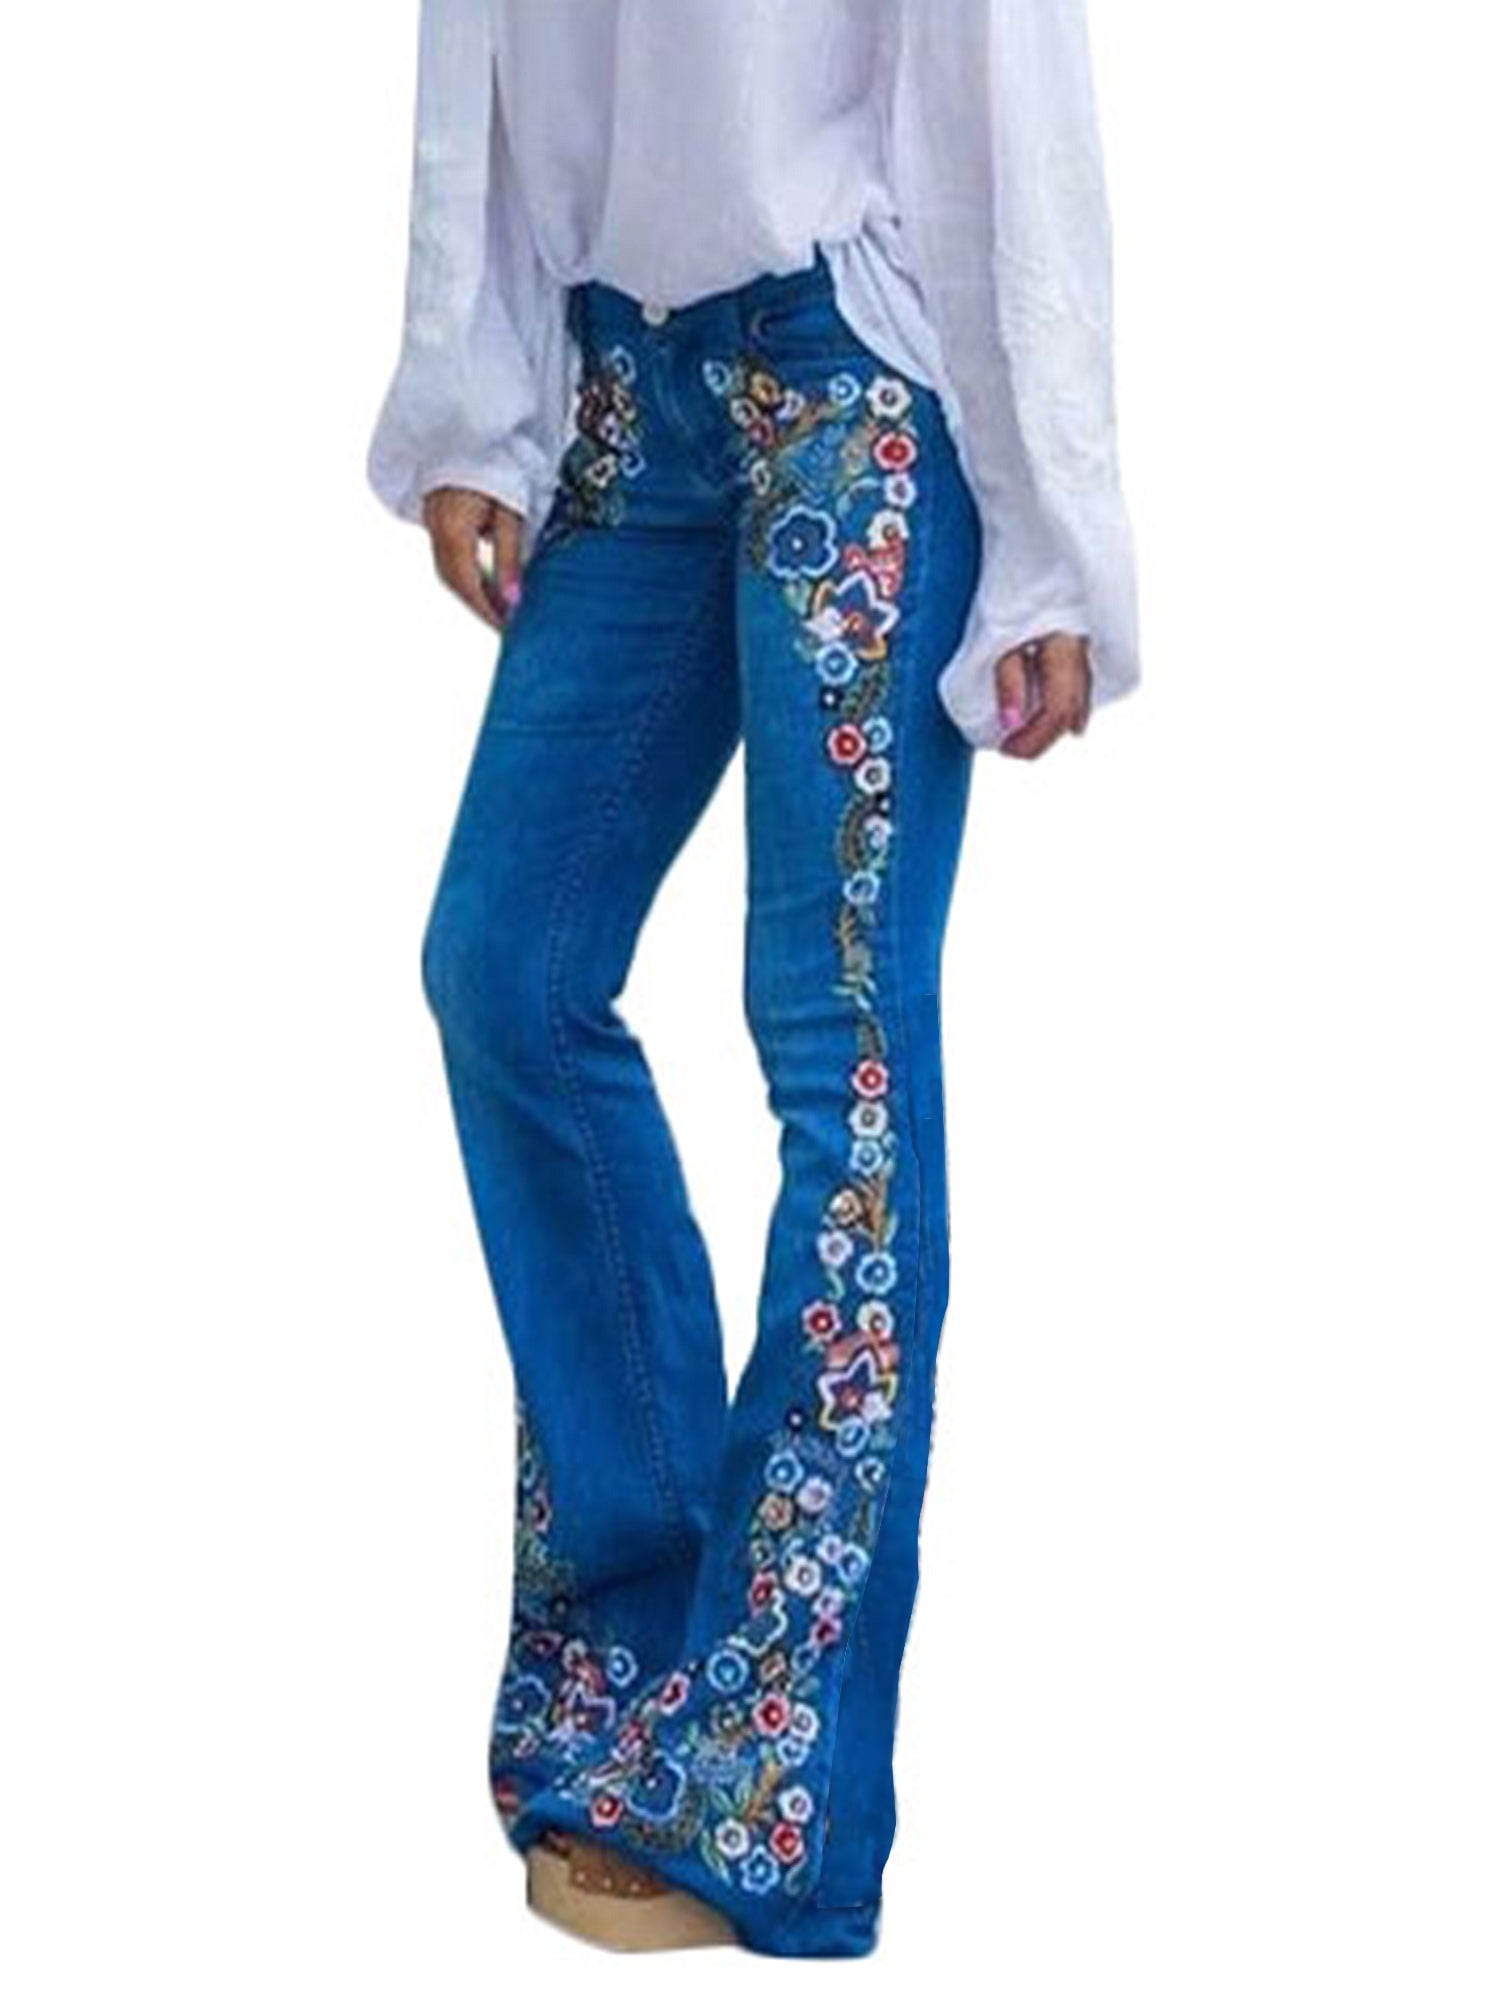 Sexy Dance - Fashion Denim Flare Pants Women Retro Embroidered Floral ...